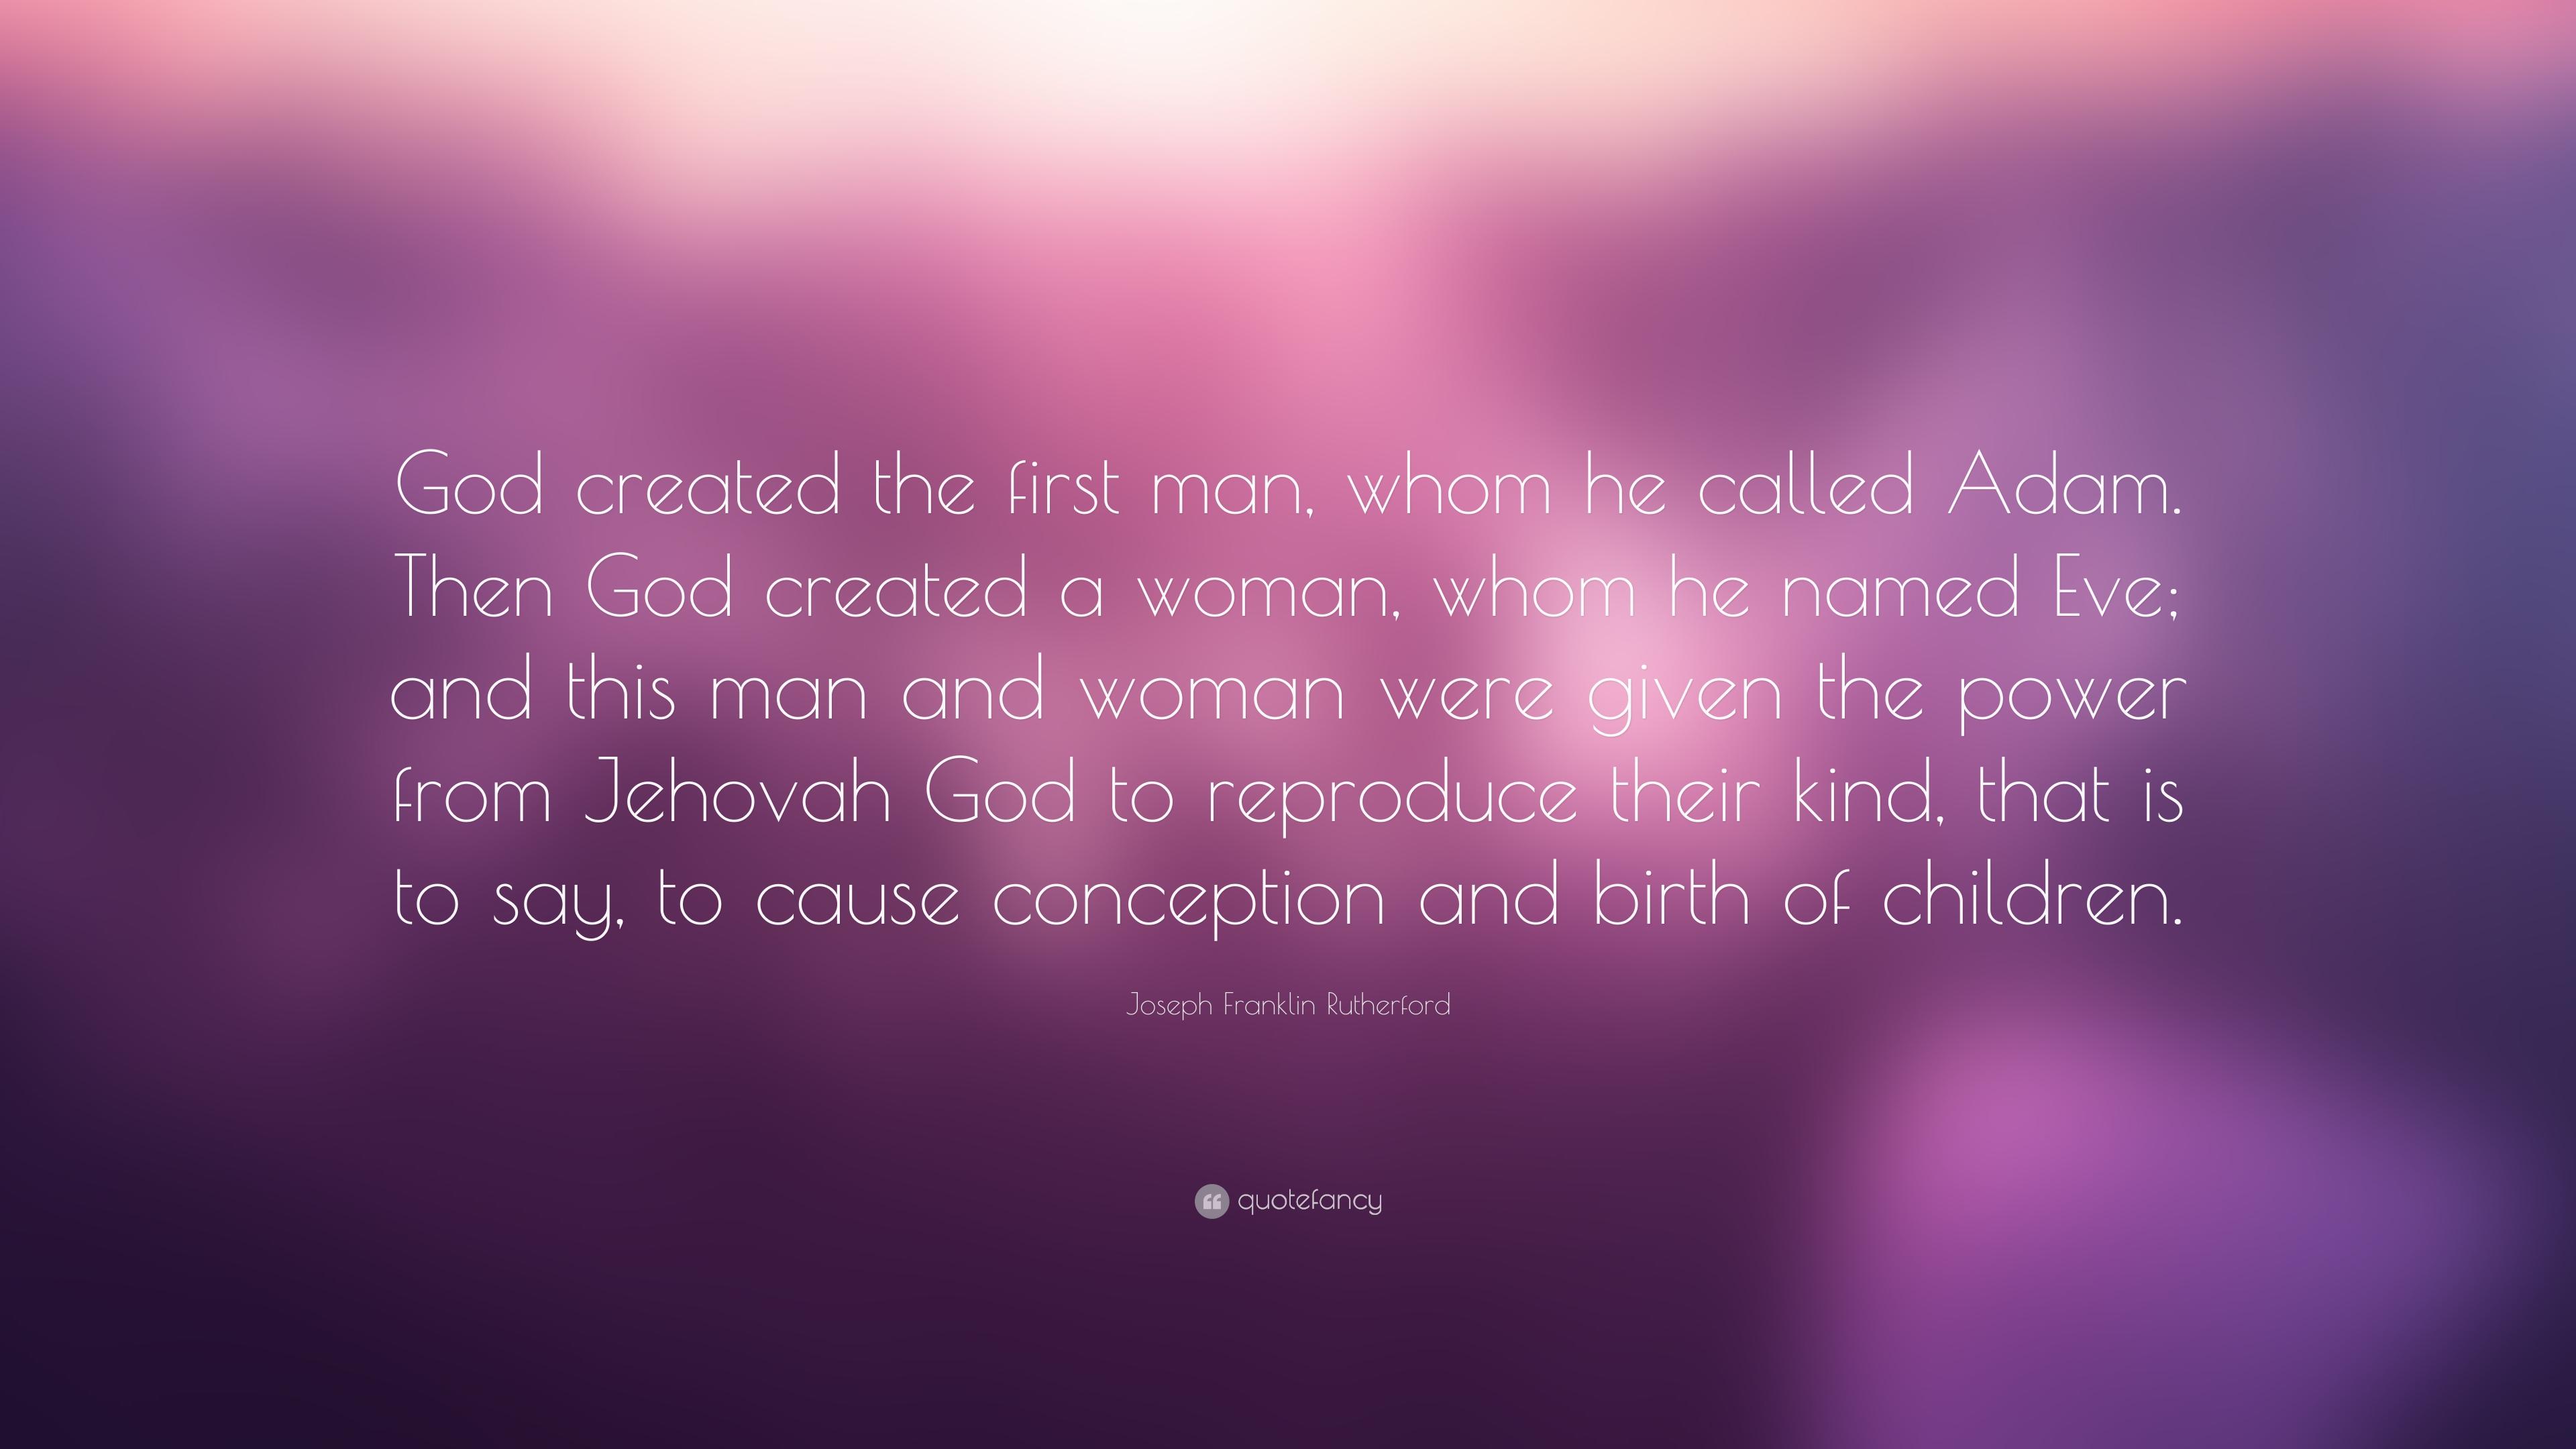 Joseph Franklin Rutherford Quote: “God created the first man, whom